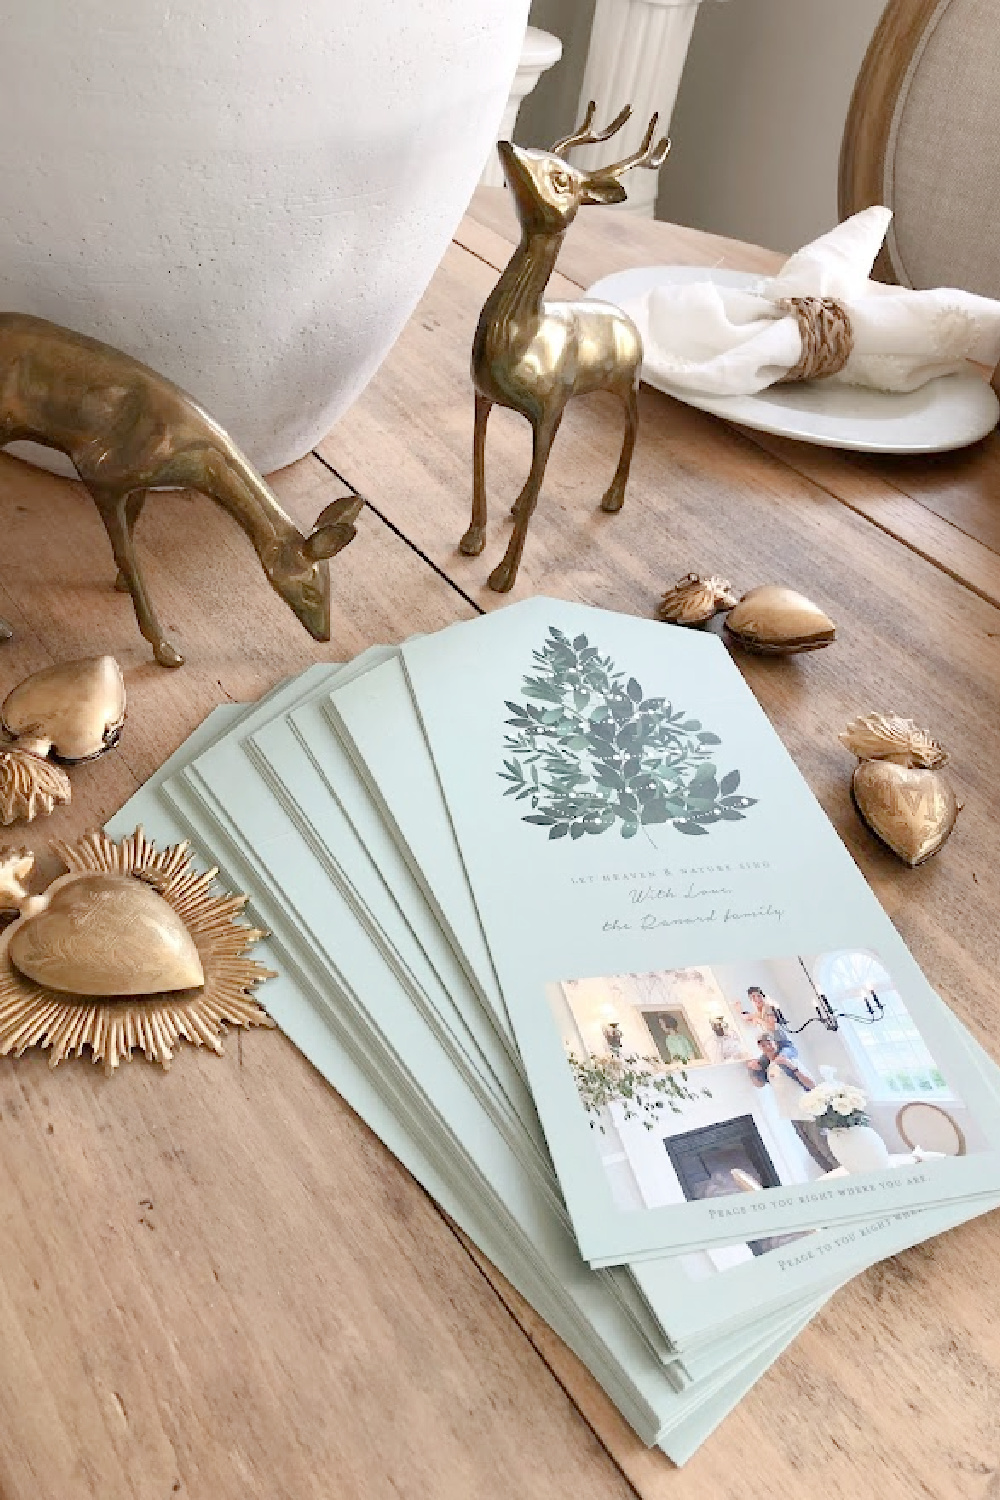 Minted photo Christmas card (Heaven and Nature Sing foldable design with perforated edge to remove photo) on dining room table with gold sacred milagros and vintage brass deer - Hello Lovely Studio. #mintedchristmascard